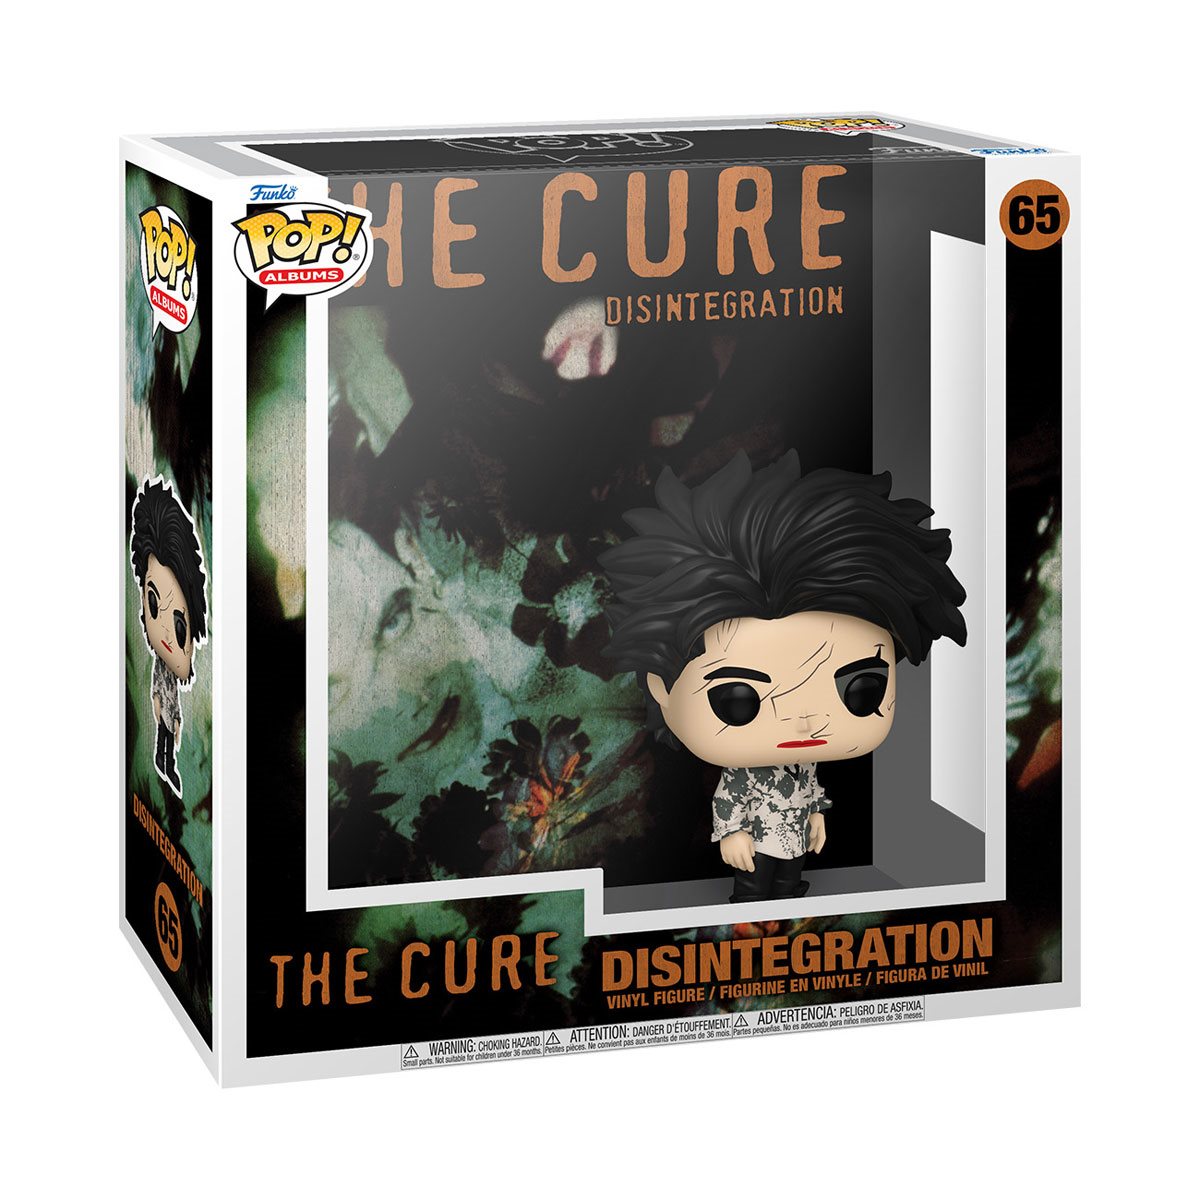 Pre-order Now: The Cure: Disintegration Pop! Album! #Funko #TheCure #ad 

Entertainment Earth ► ee.toys/KGZM0B
Amazon ► amzn.to/43RKxYu